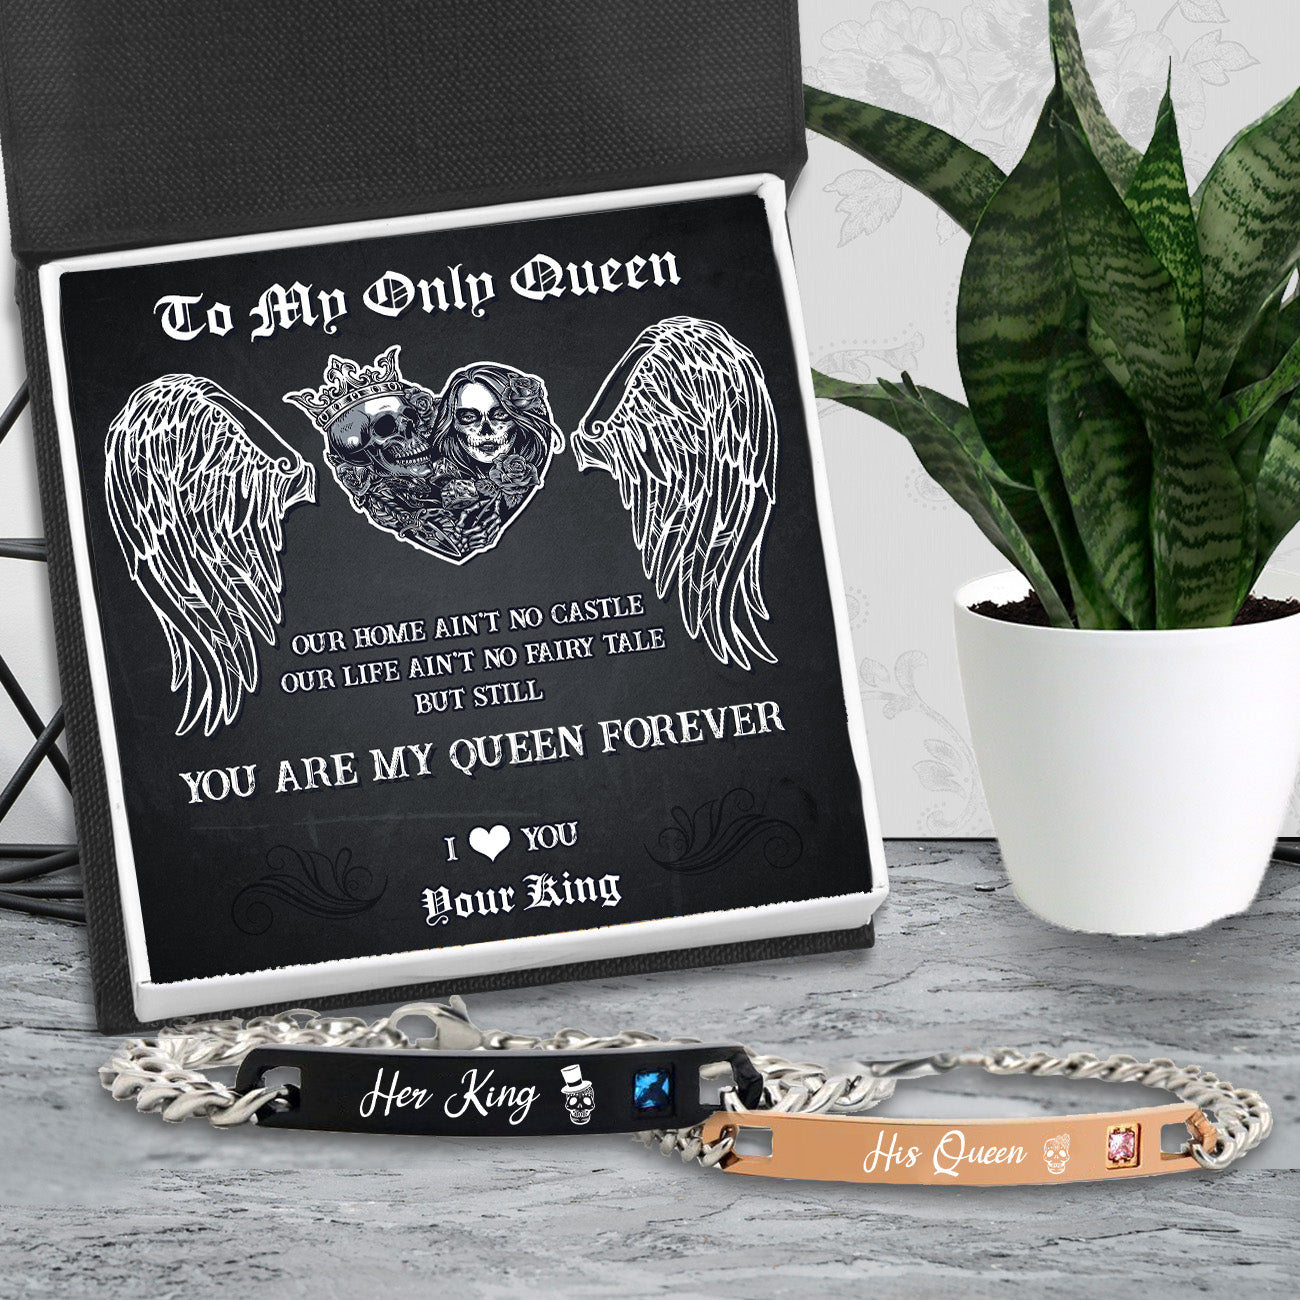 King & Queen Bracelet - Skull - To My Only Queen - You Are My Queen Forever - Ukgbza13001